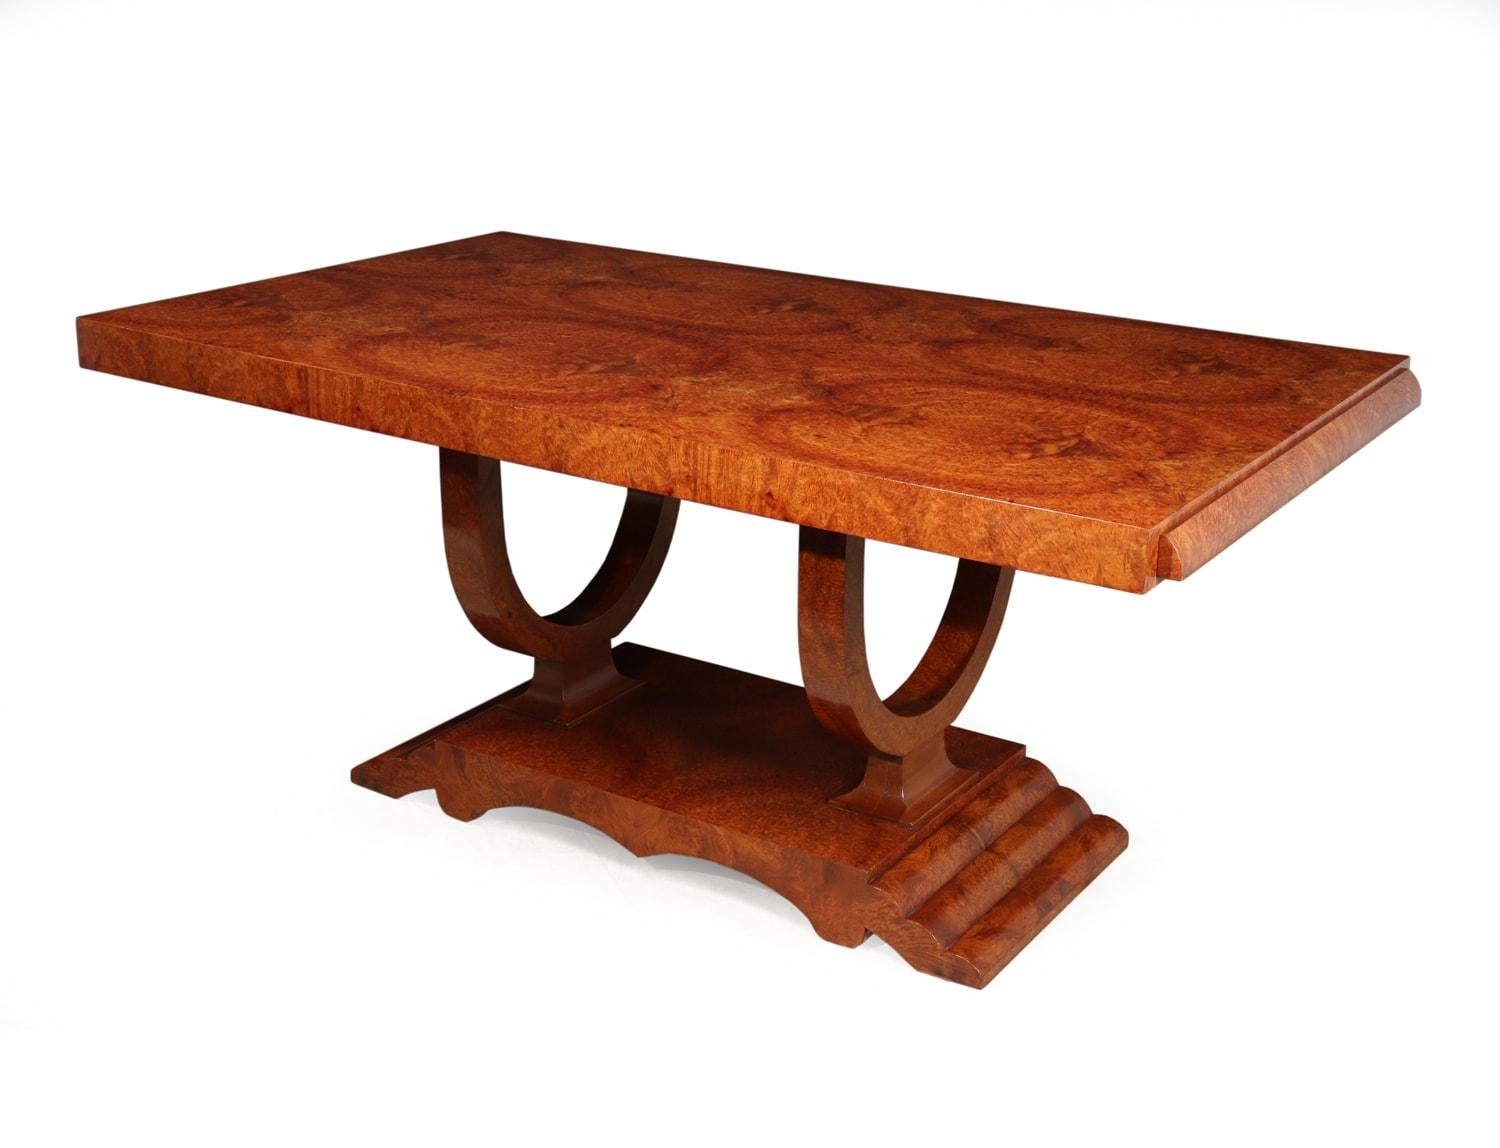 A French Art Deco Amboyna extending dining table, circa 1930

This dining table was produced in France in the 1930s. Standing on a double U base all smothered in the luxurious tight burr of amboyna, the table has two extension leaves so the table